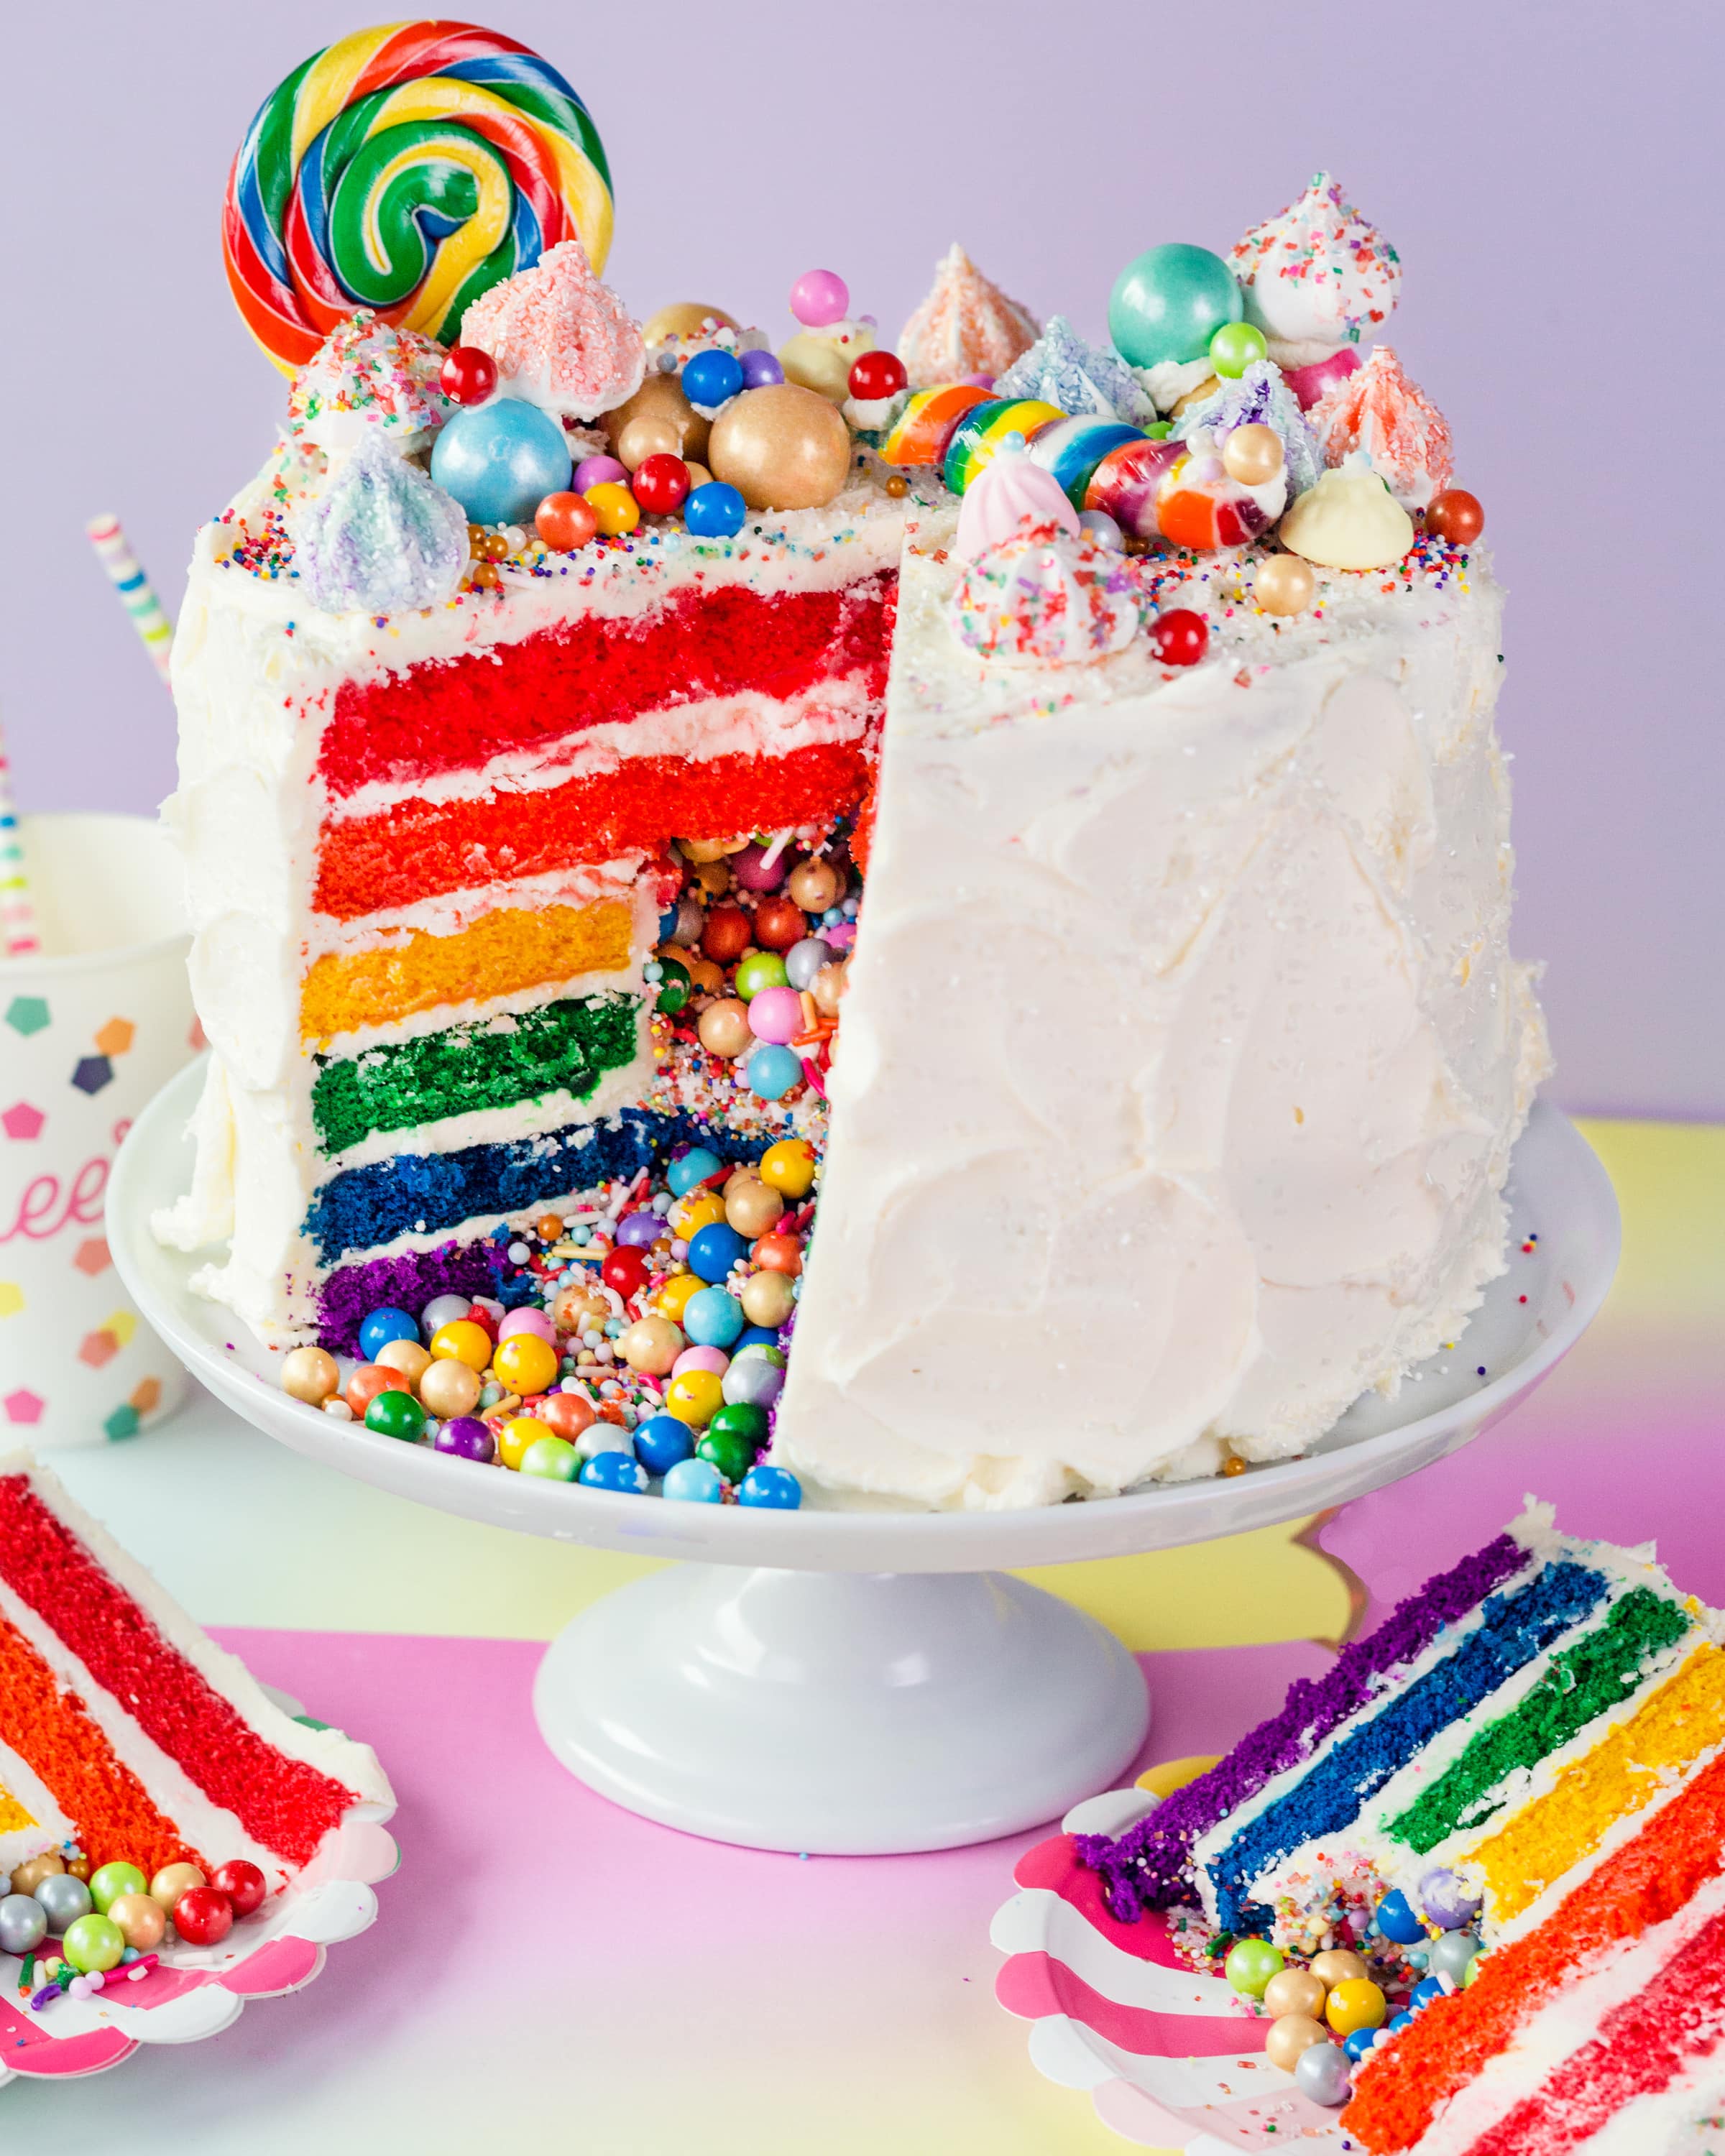 How To Make a Rainbow Layer Cake with a Candy Surprise Inside | Kitchn